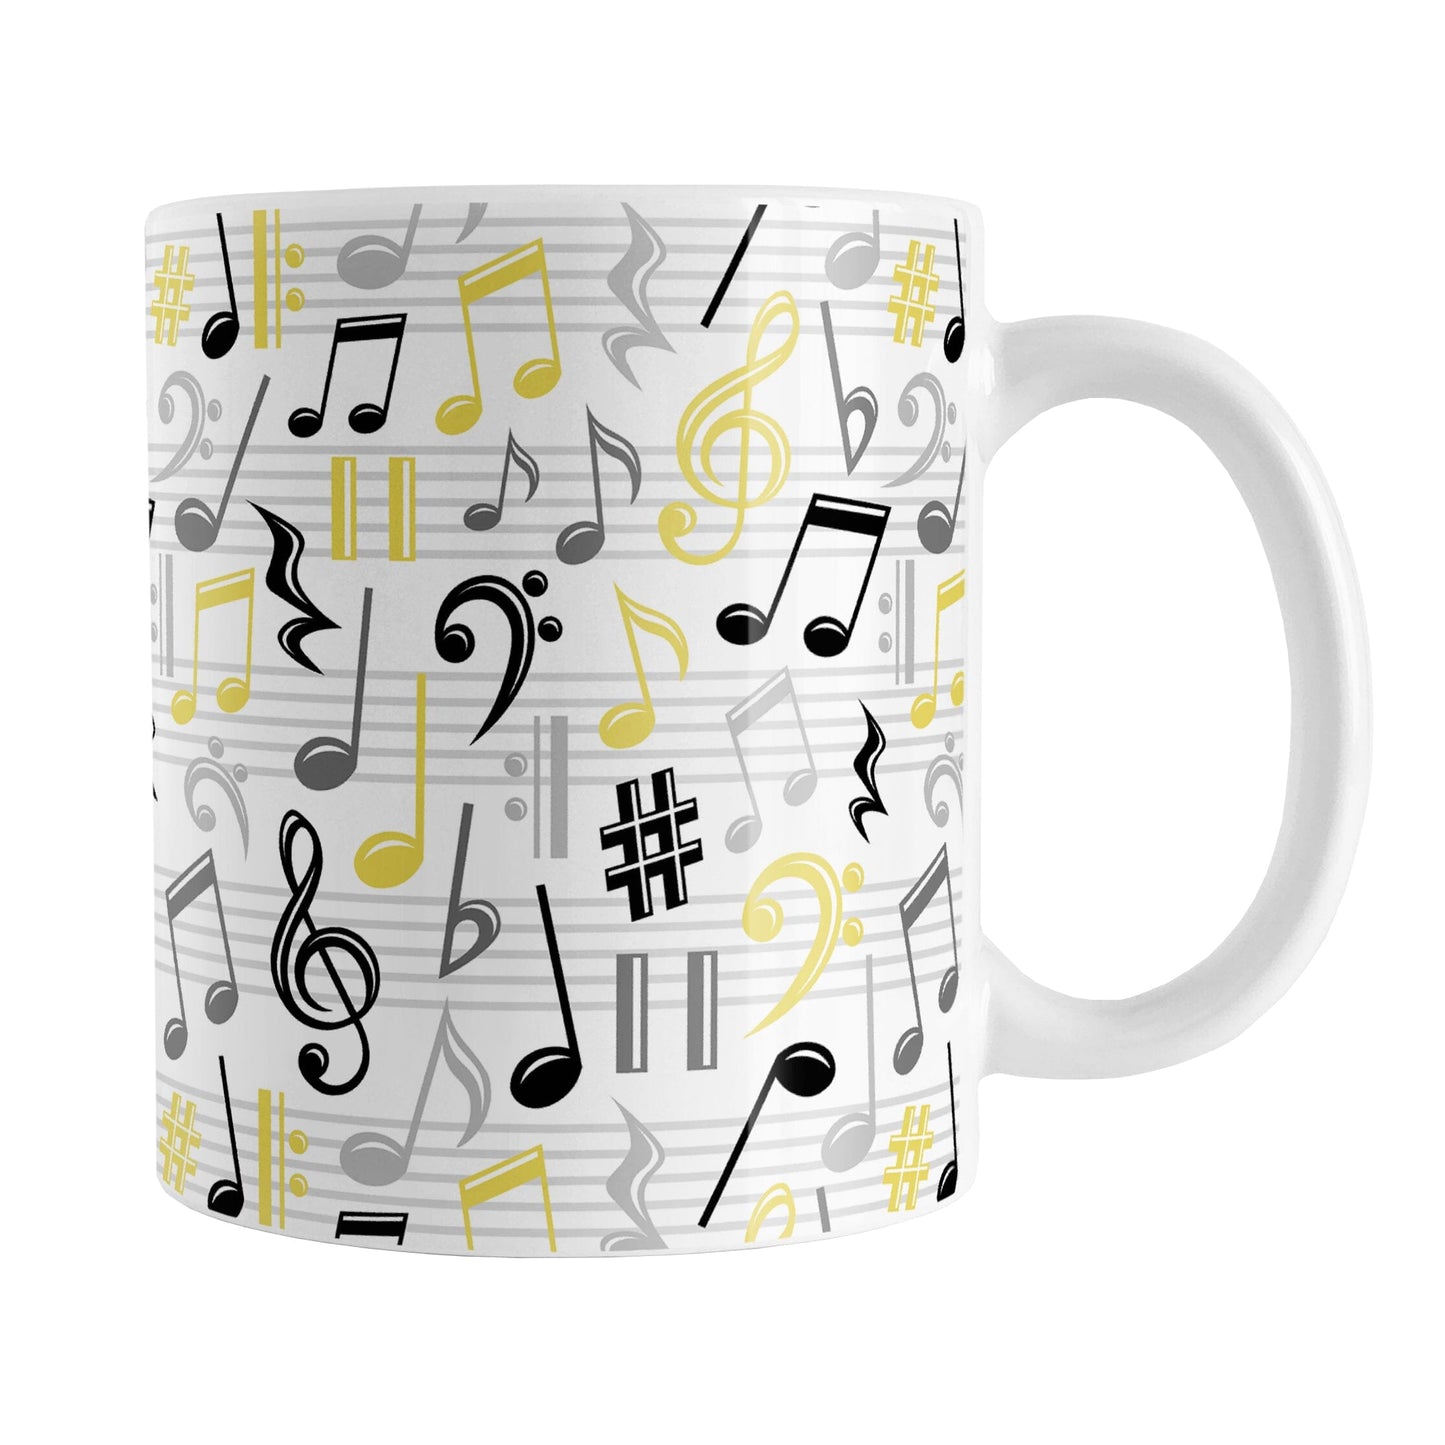 Yellow Music Notes Pattern Mug (11oz) at Amy's Coffee Mugs. A ceramic coffee mug designed with music notes and symbols in yellow, black, and gray in a pattern that wraps around the mug to the handle.